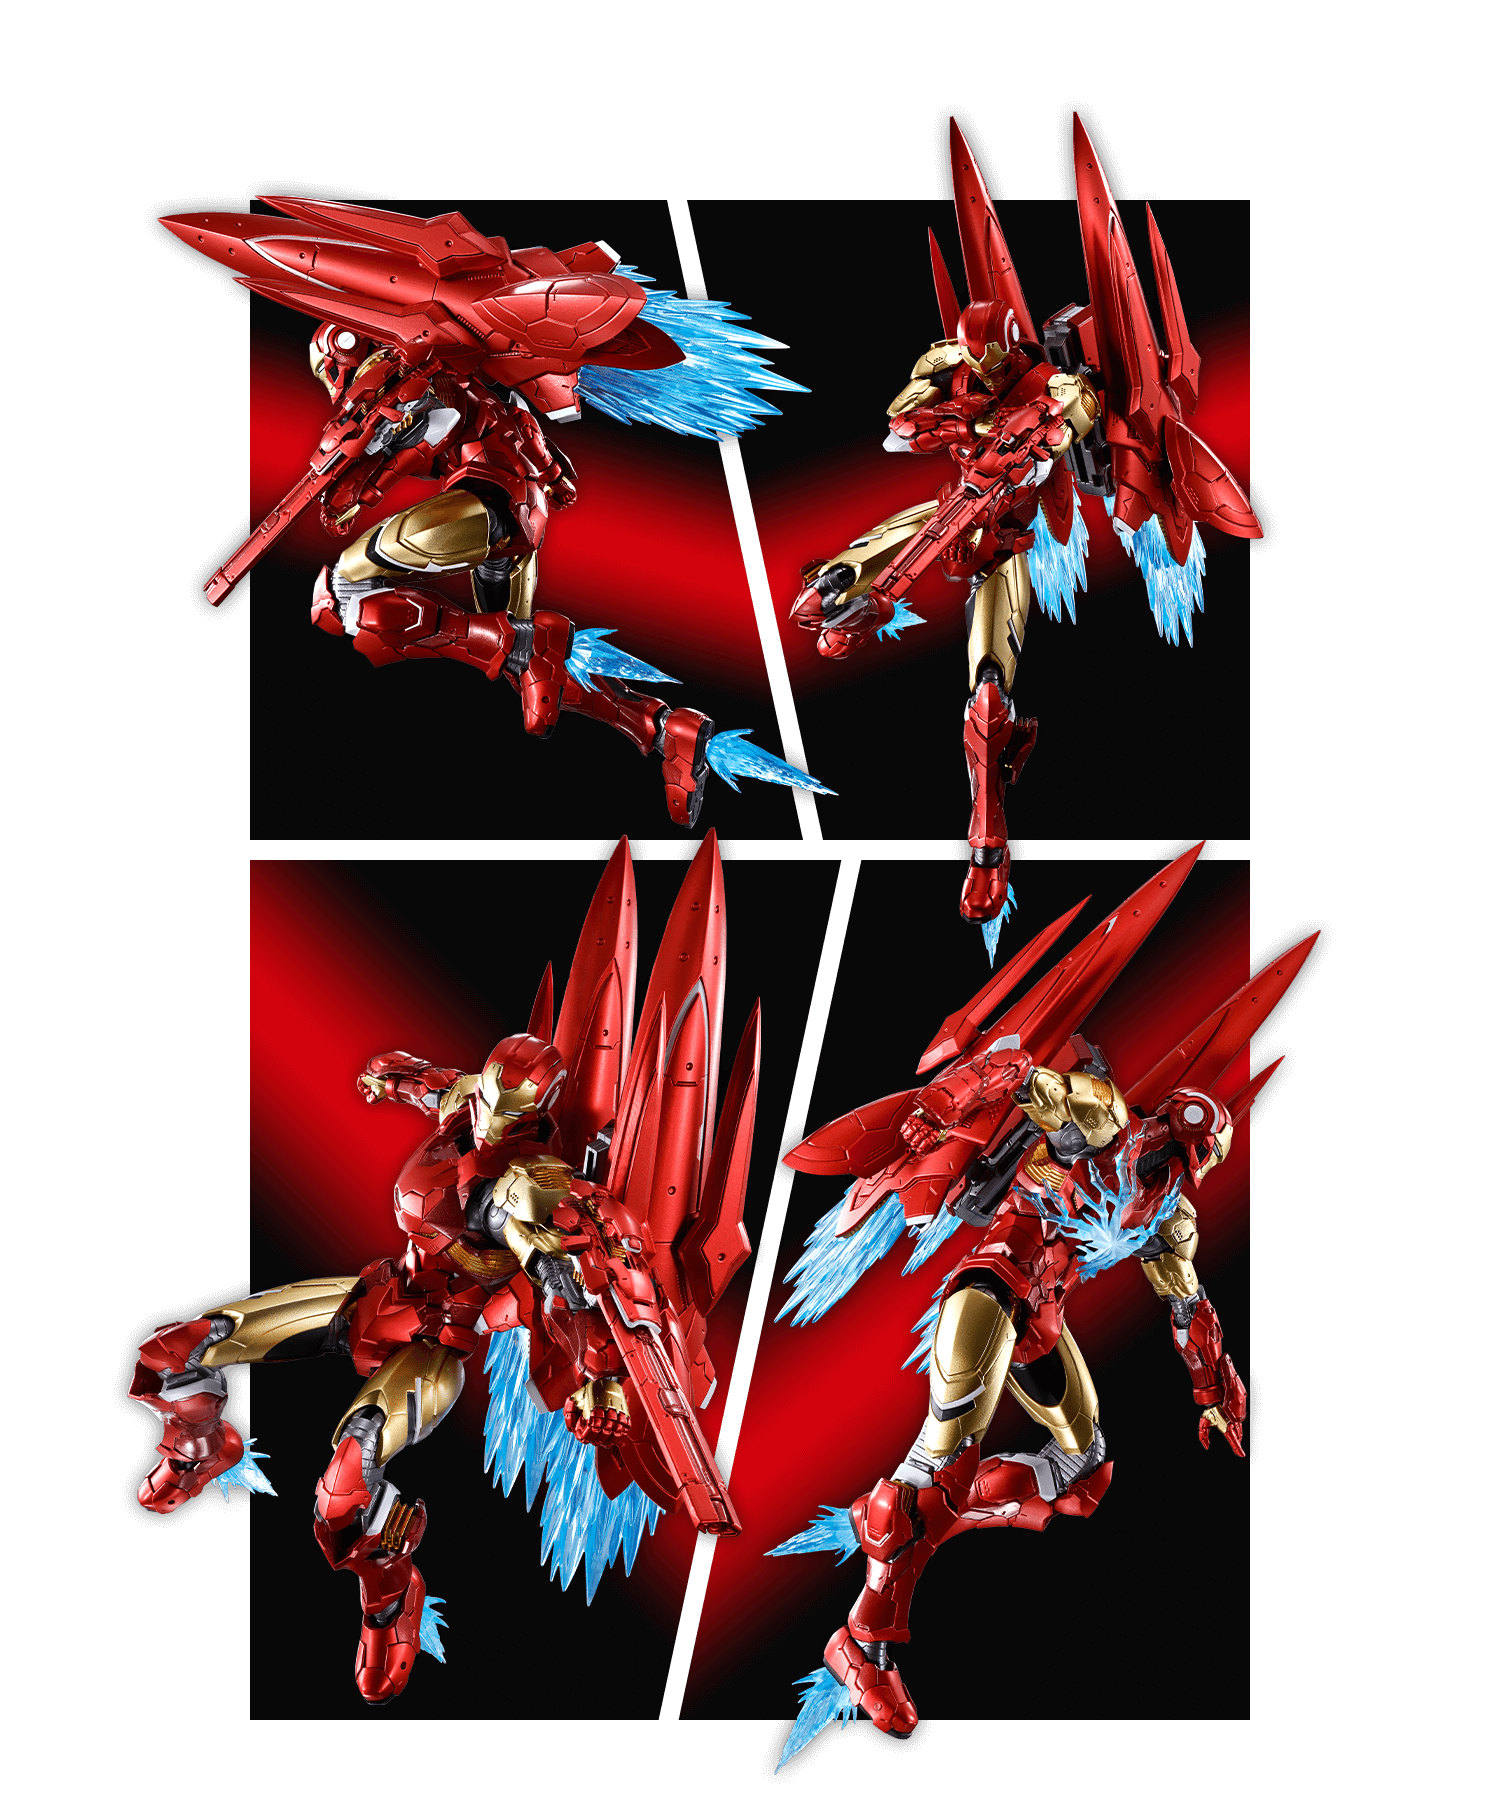 The DH-10 Mode releases energy all at once, unleashing overwhelming power.S.H.Figuarts make reenactments of mode change possible with interchangeable parts.